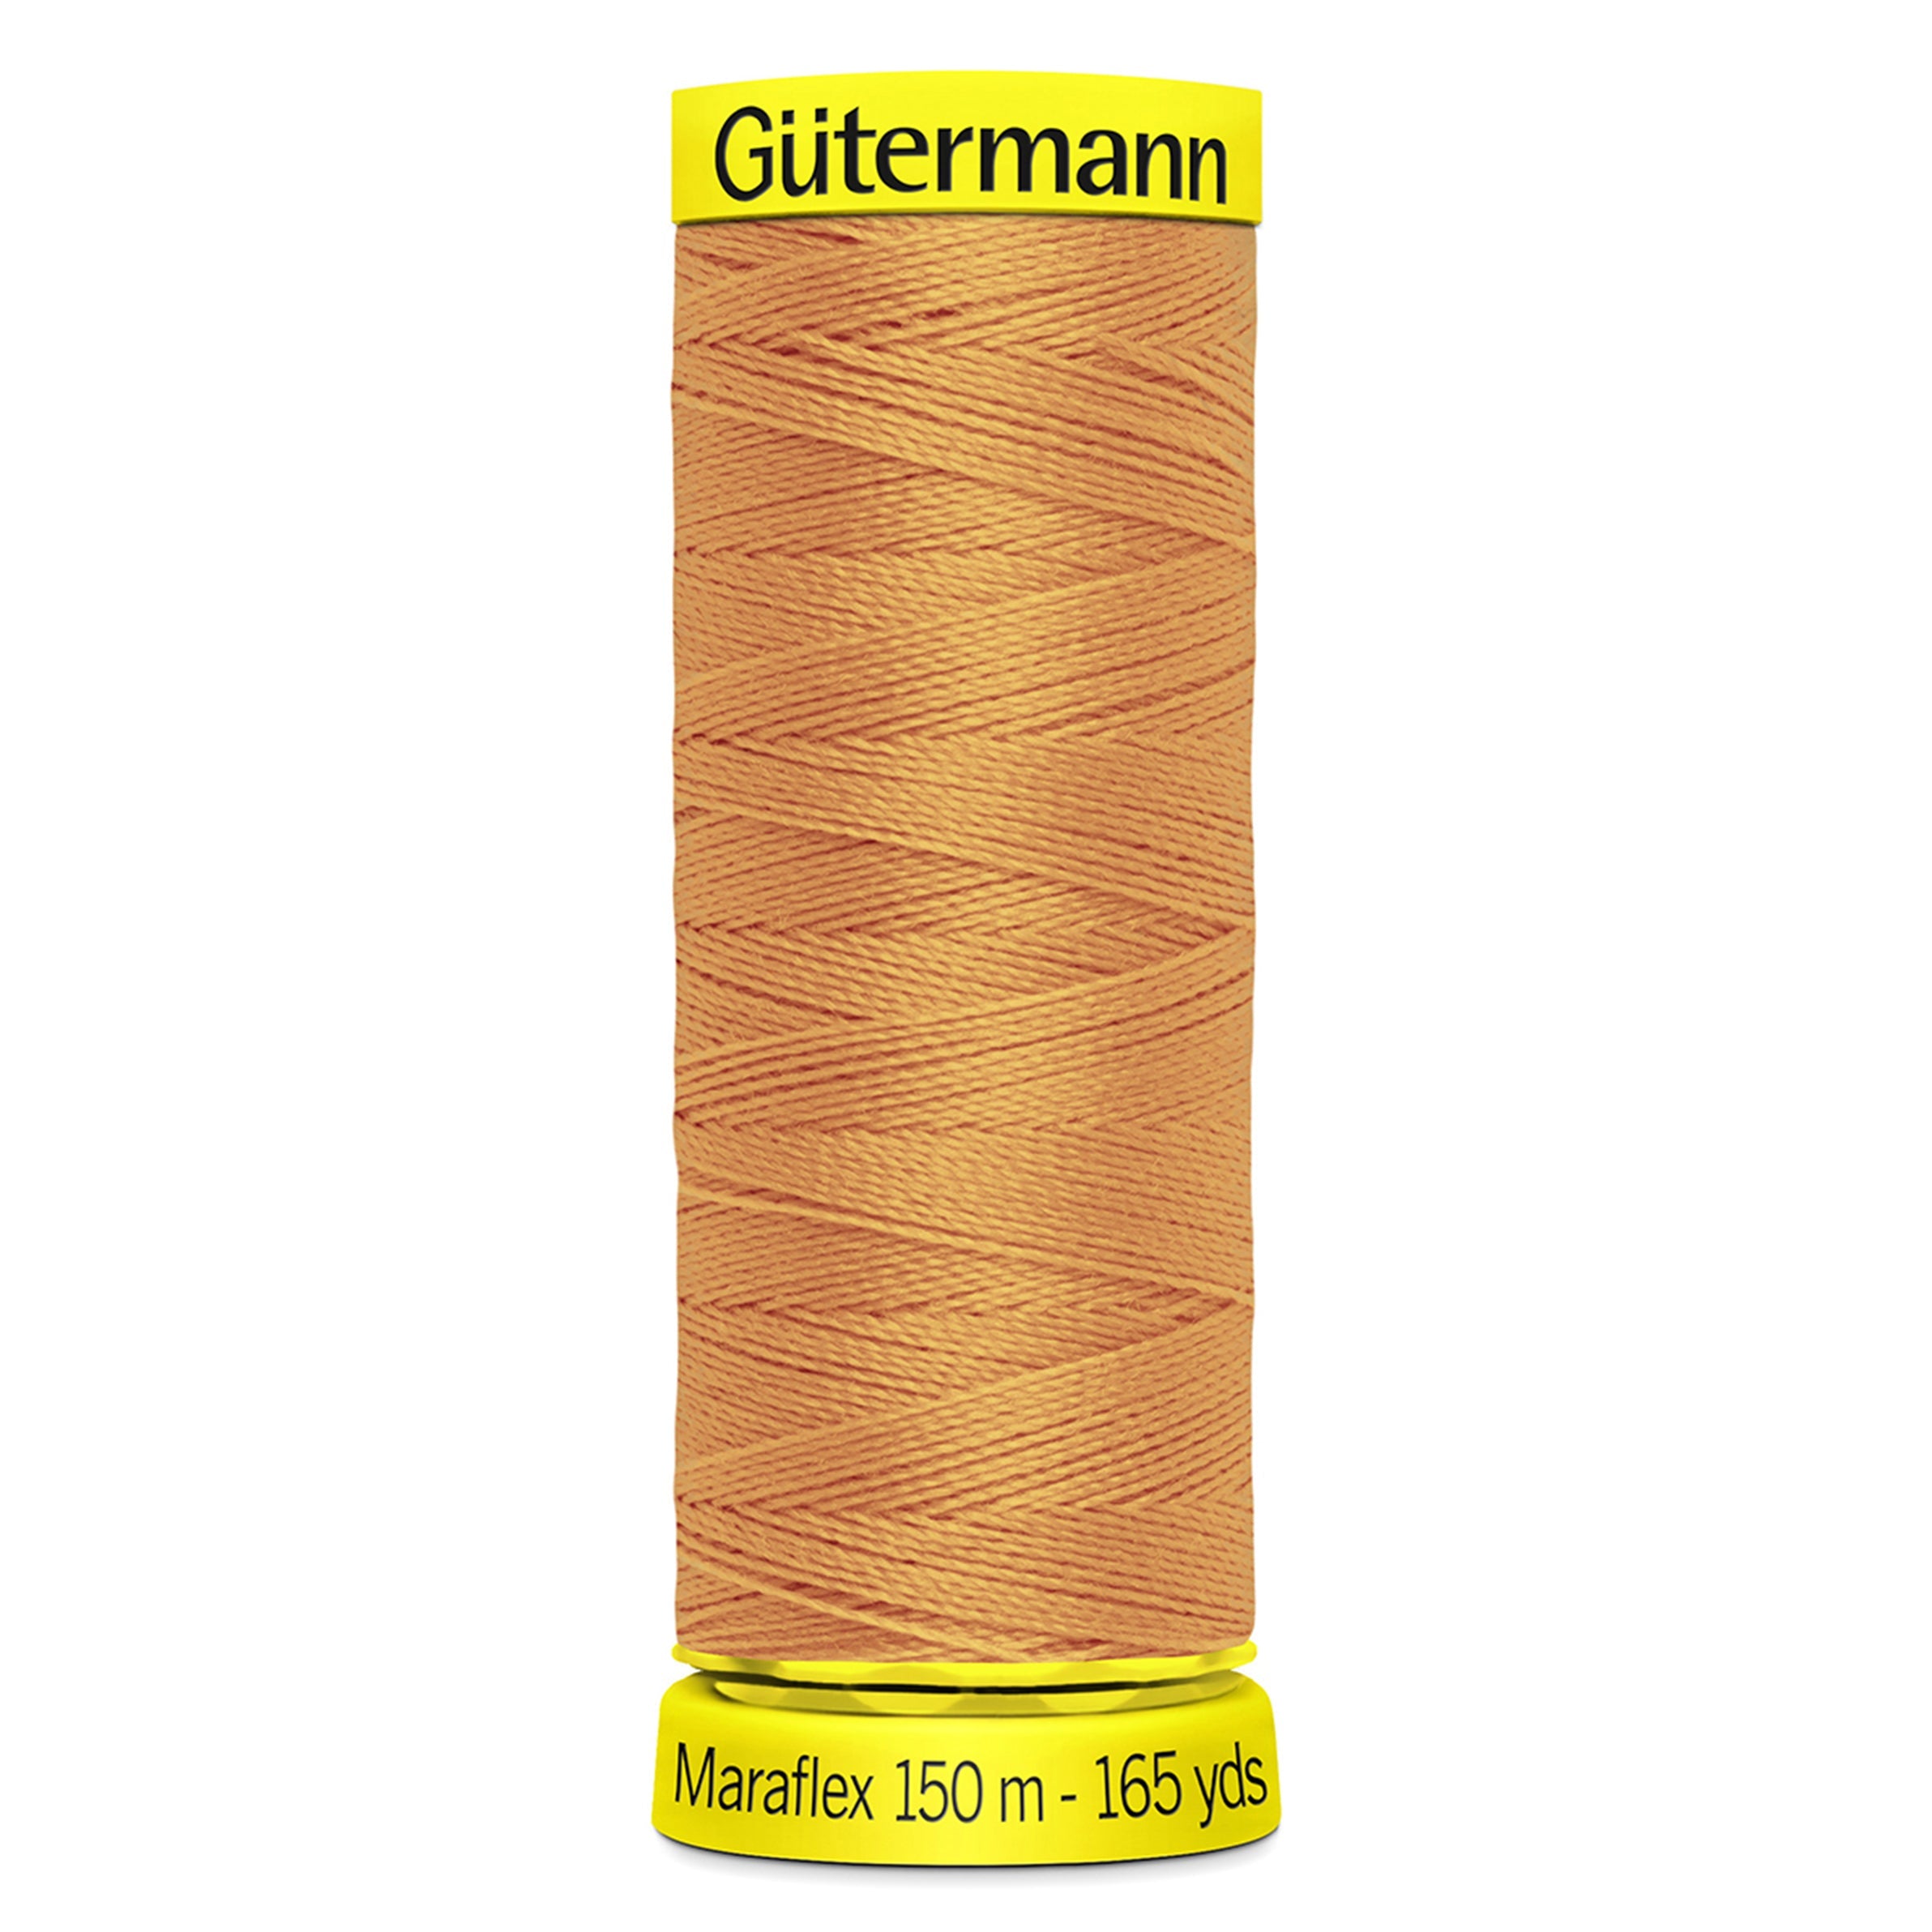 Gutermann Maraflex Stretchy Sewing Thread 150m colour 300 Apricot from Jaycotts Sewing Supplies